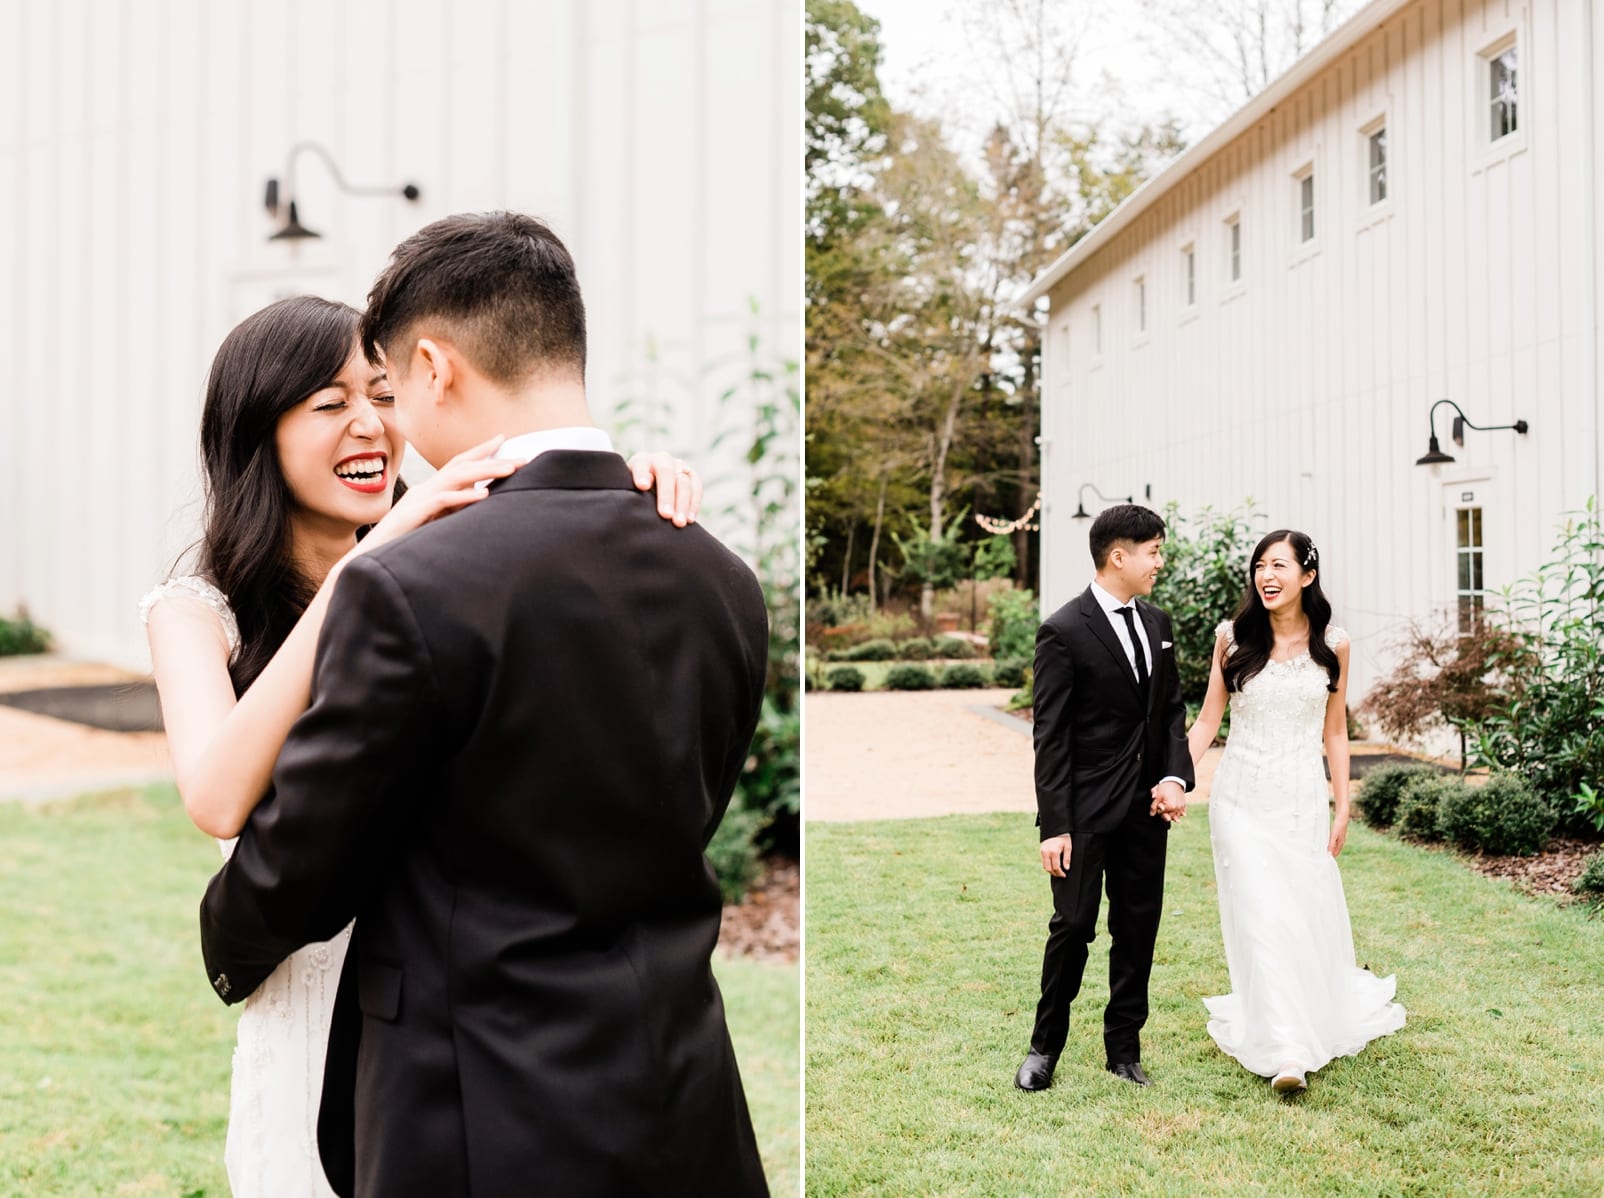 Barn of Chapel Hill bride and groom walking together photo